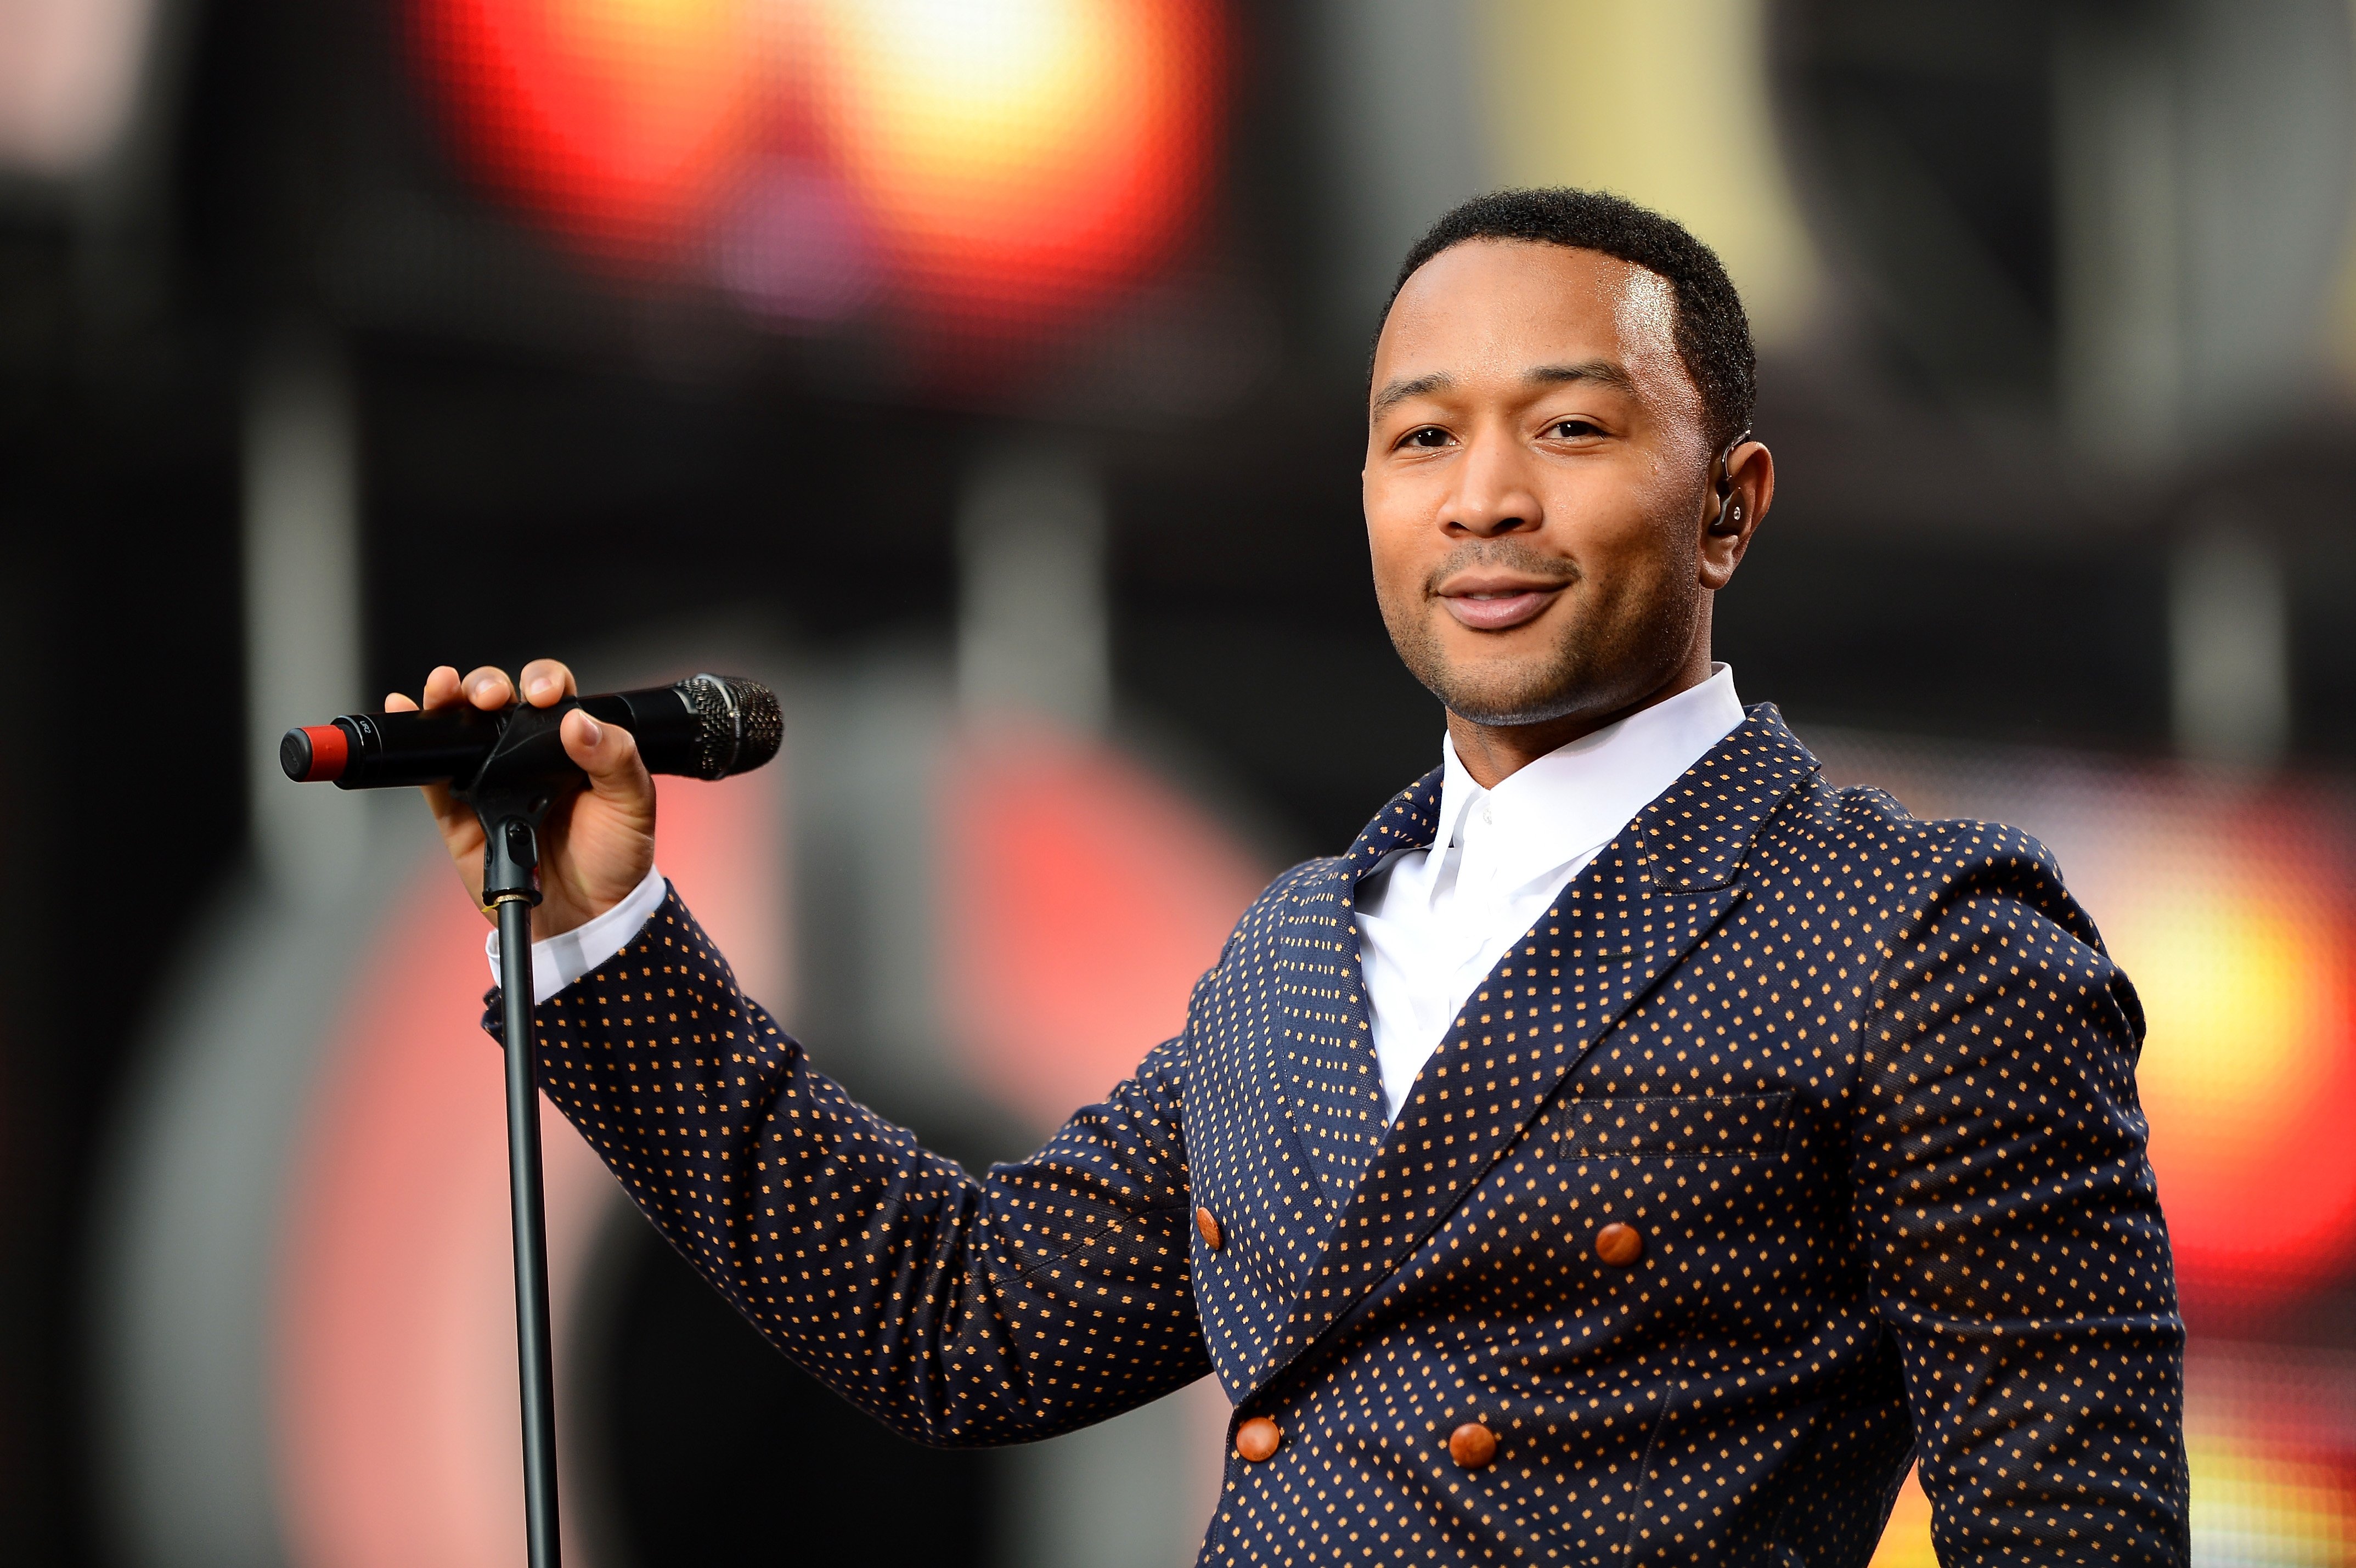 Singer John Legend performs on stage at the "Chime For Change: The Sound Of Change Live" Concert at Twickenham Stadium on June 1, 2013, in London, England. | Source: Getty Images.